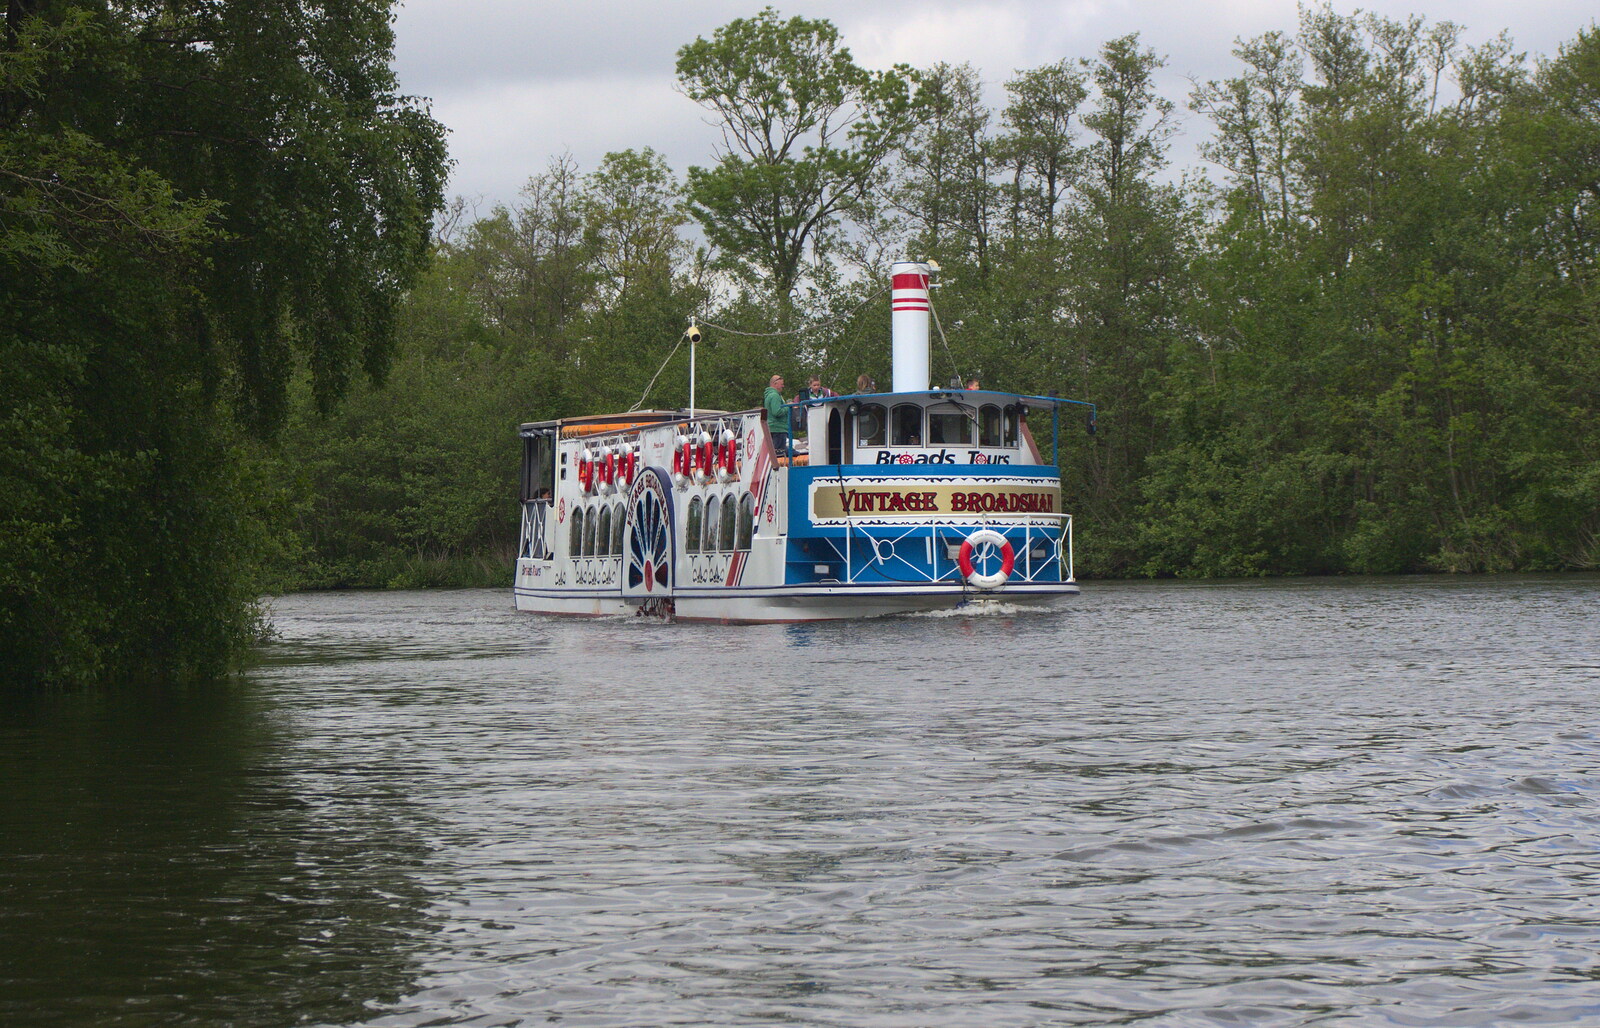 The paddle boat 'Vintage Broadsman' from A Trip on the Norfolk Broads, Wroxham, Norfolk - 25th May 2013